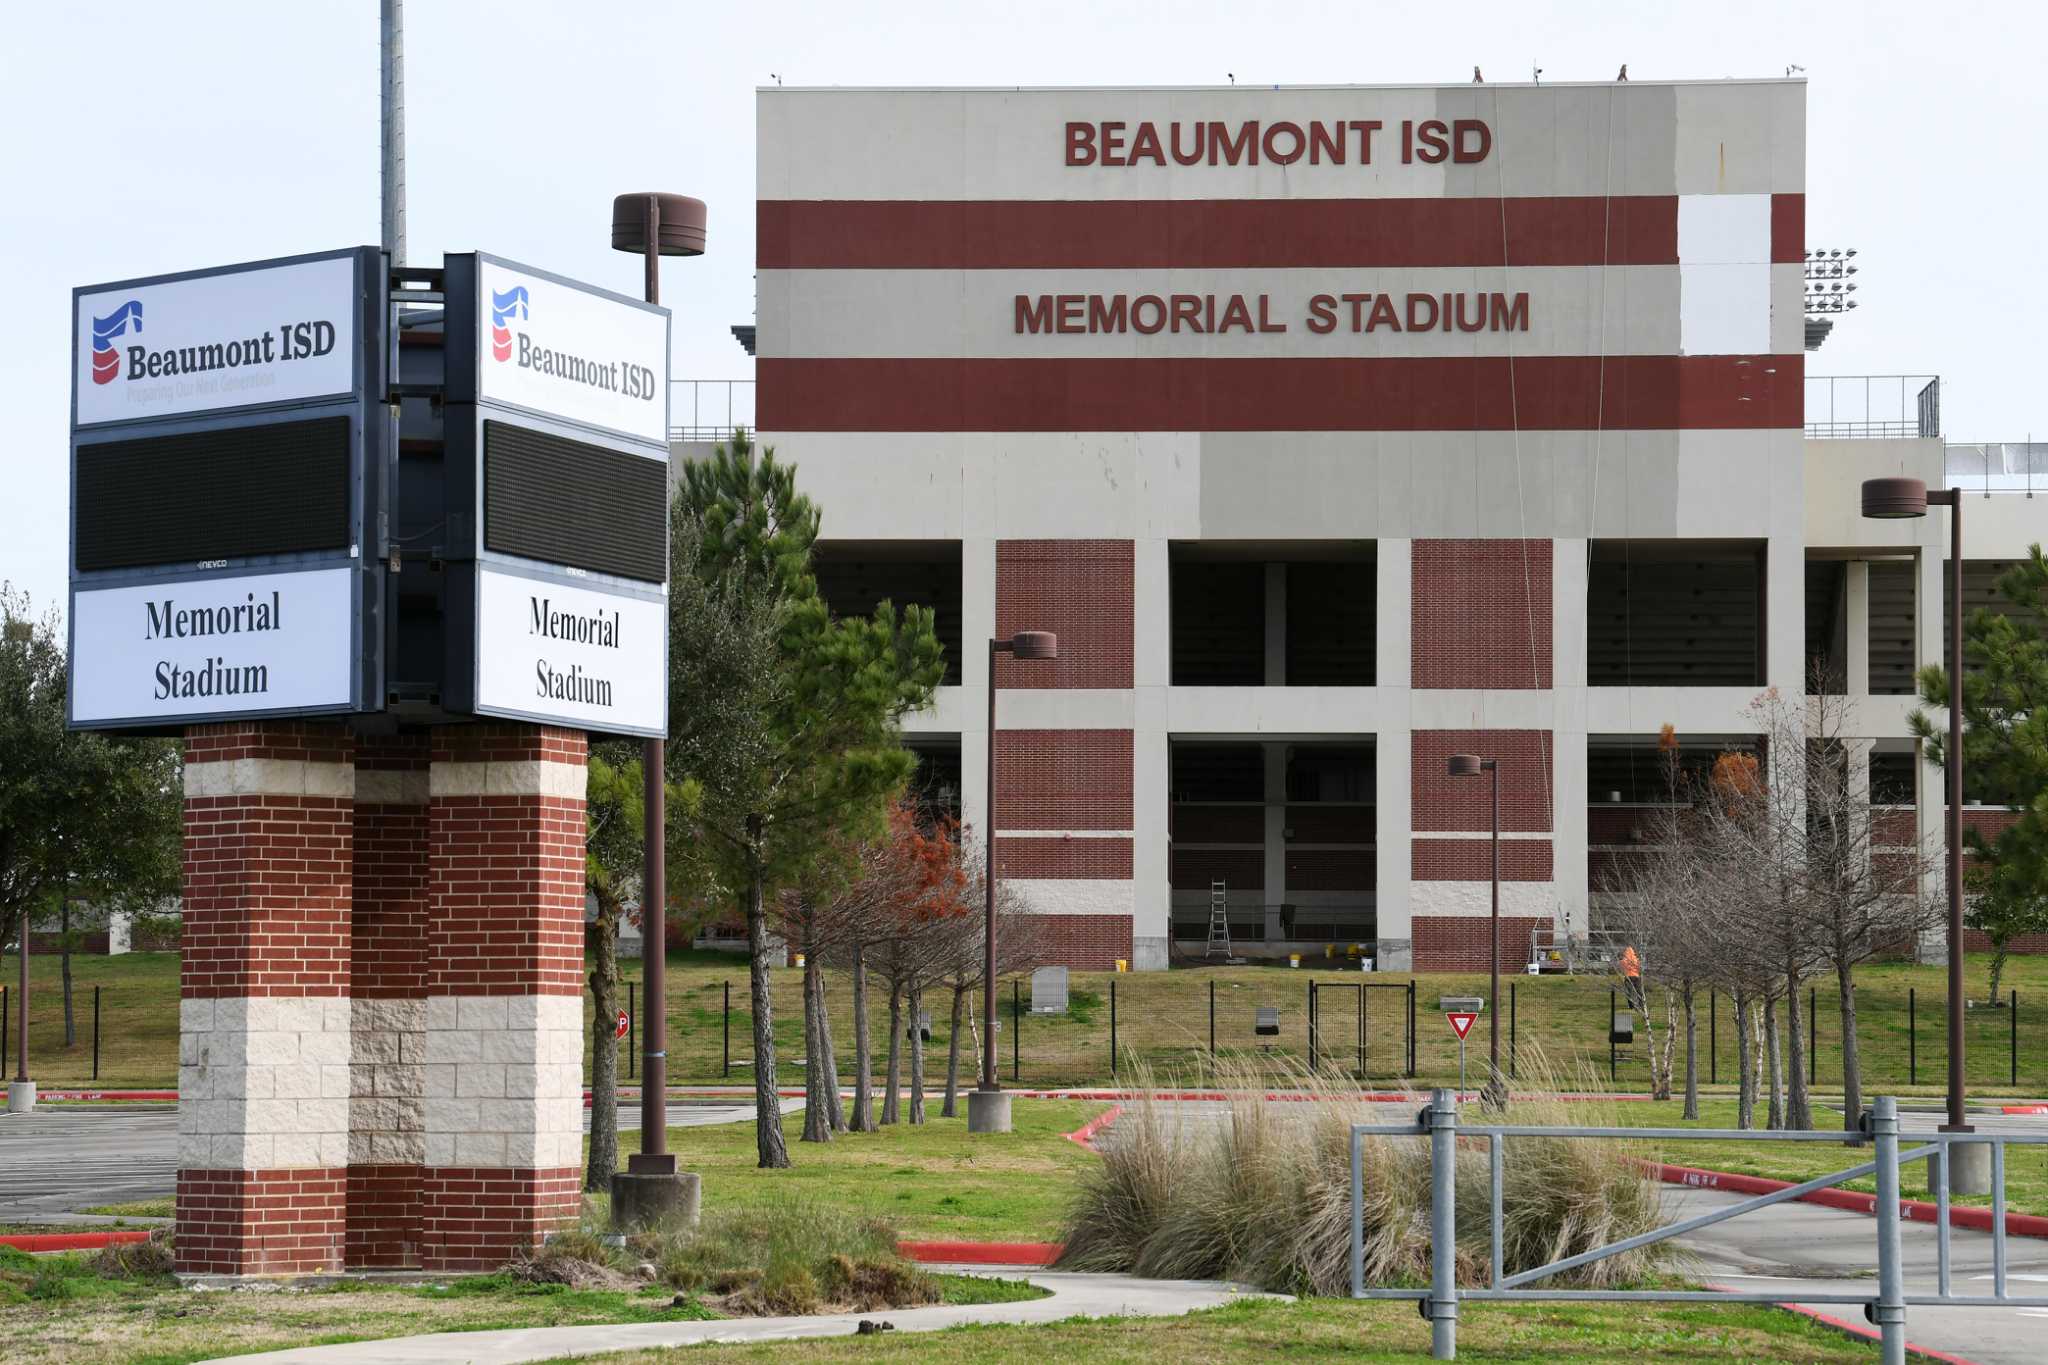 Beaumont ISD Memorial Stadium naming rights on sale again